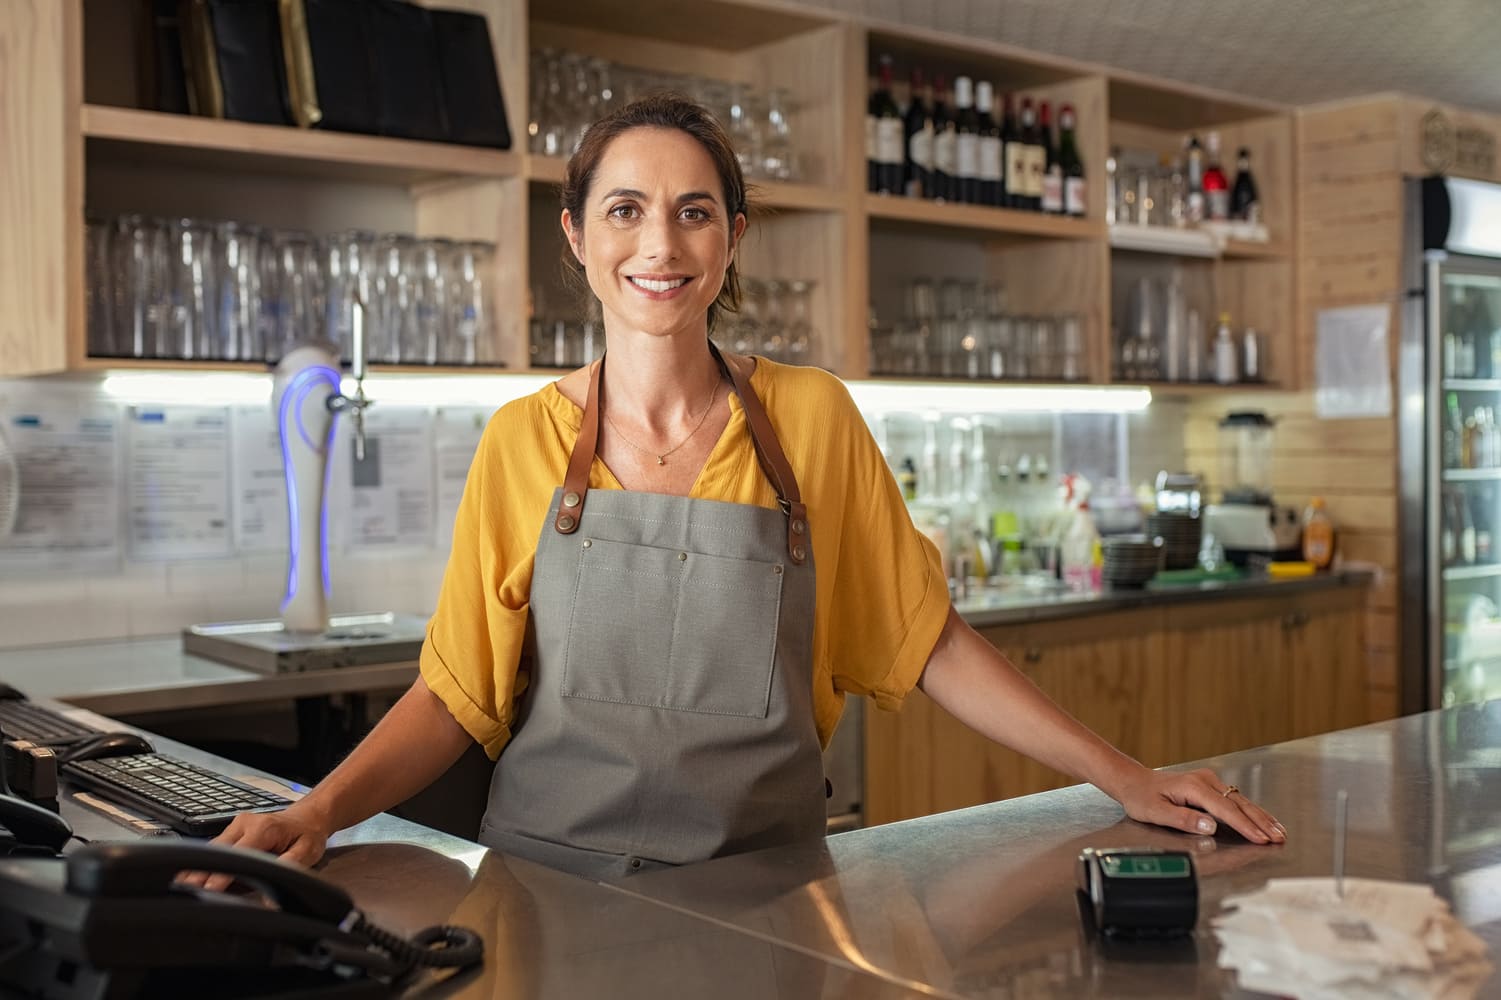 Mature woman barista standing behind the bar counter in coffee shop and looking at camera. Smiling small business owner smiling behind the counter. Portrait of beautiful waitress wearing apron.